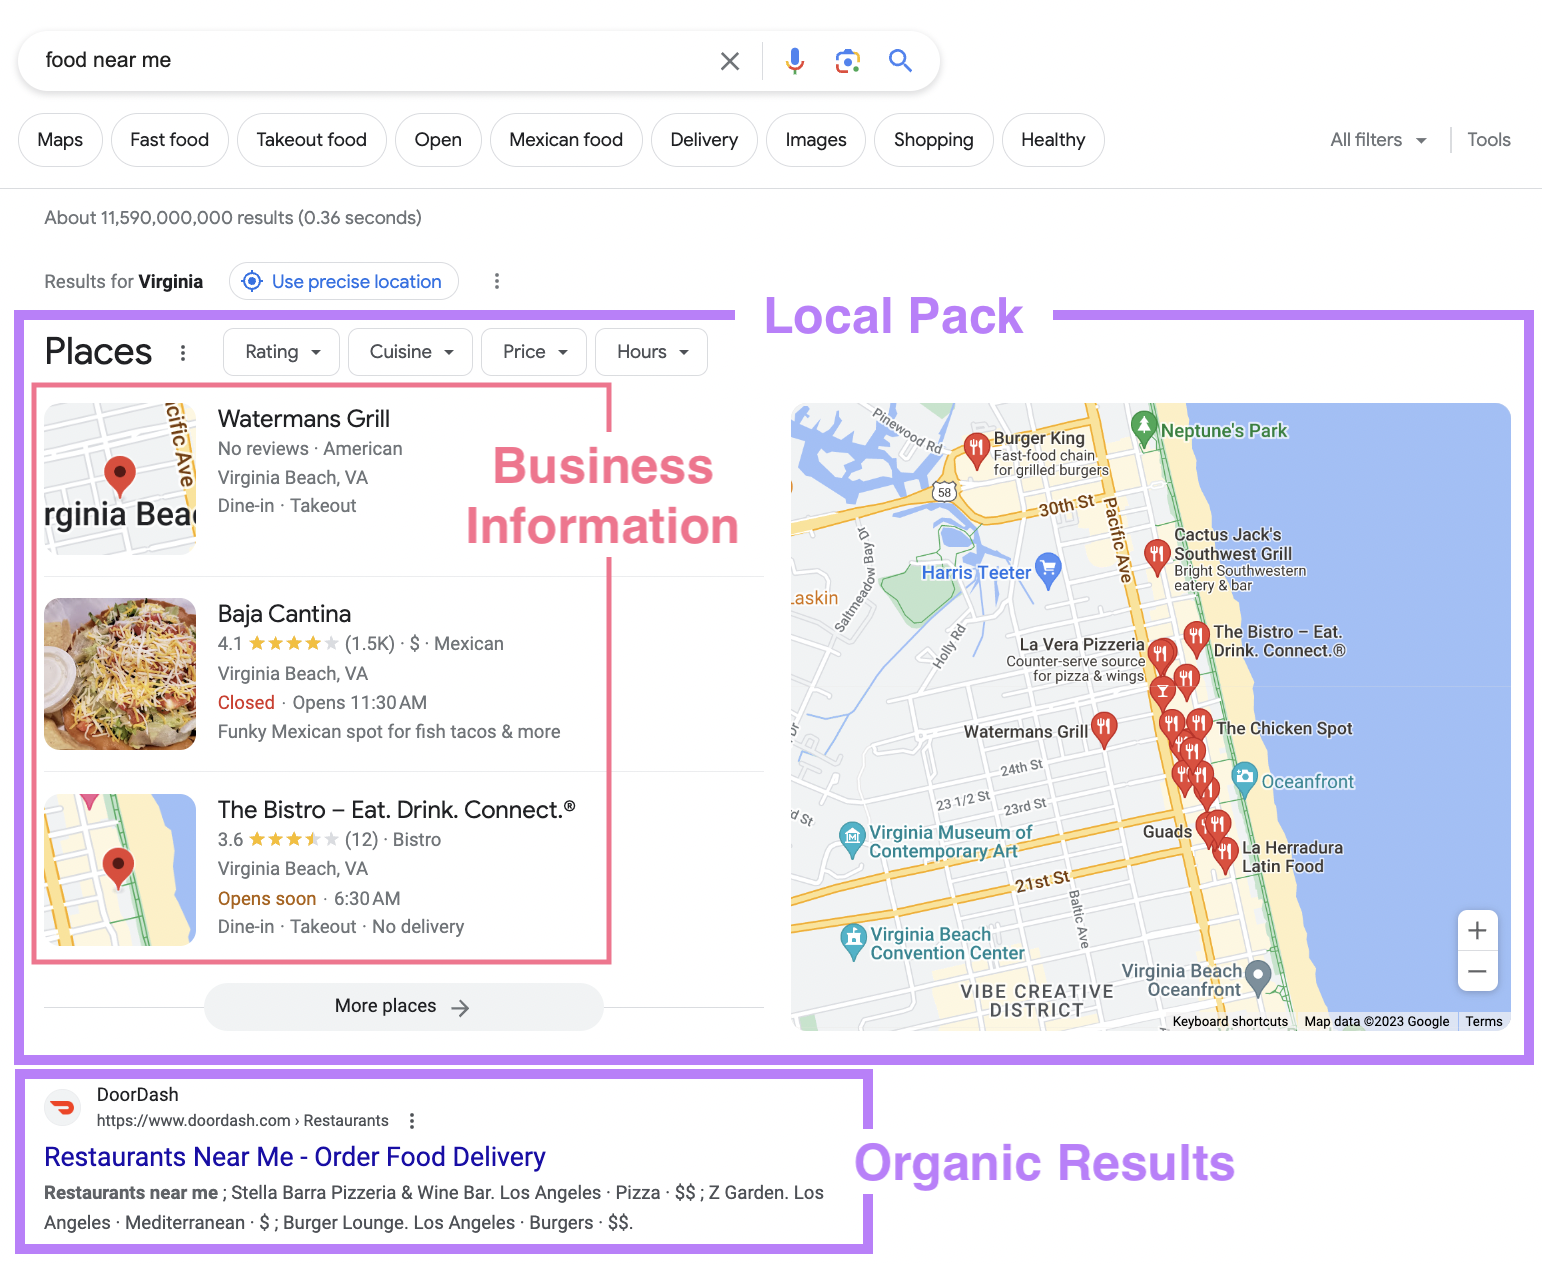 Google's local pack results for "food near me" displayed with "organic results" below